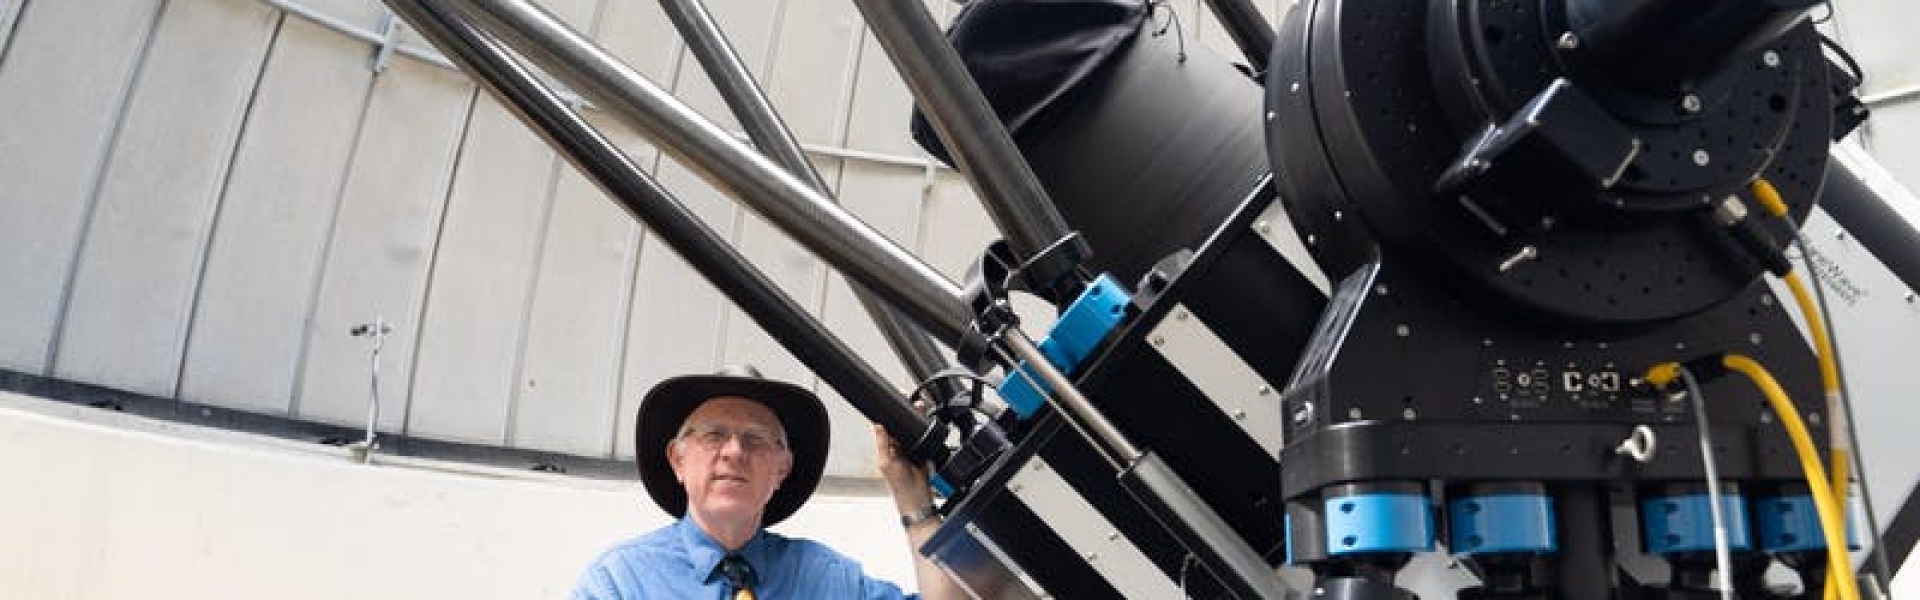 Paul Delaney and Allan I. Carswell Observatory 1-metre telescope